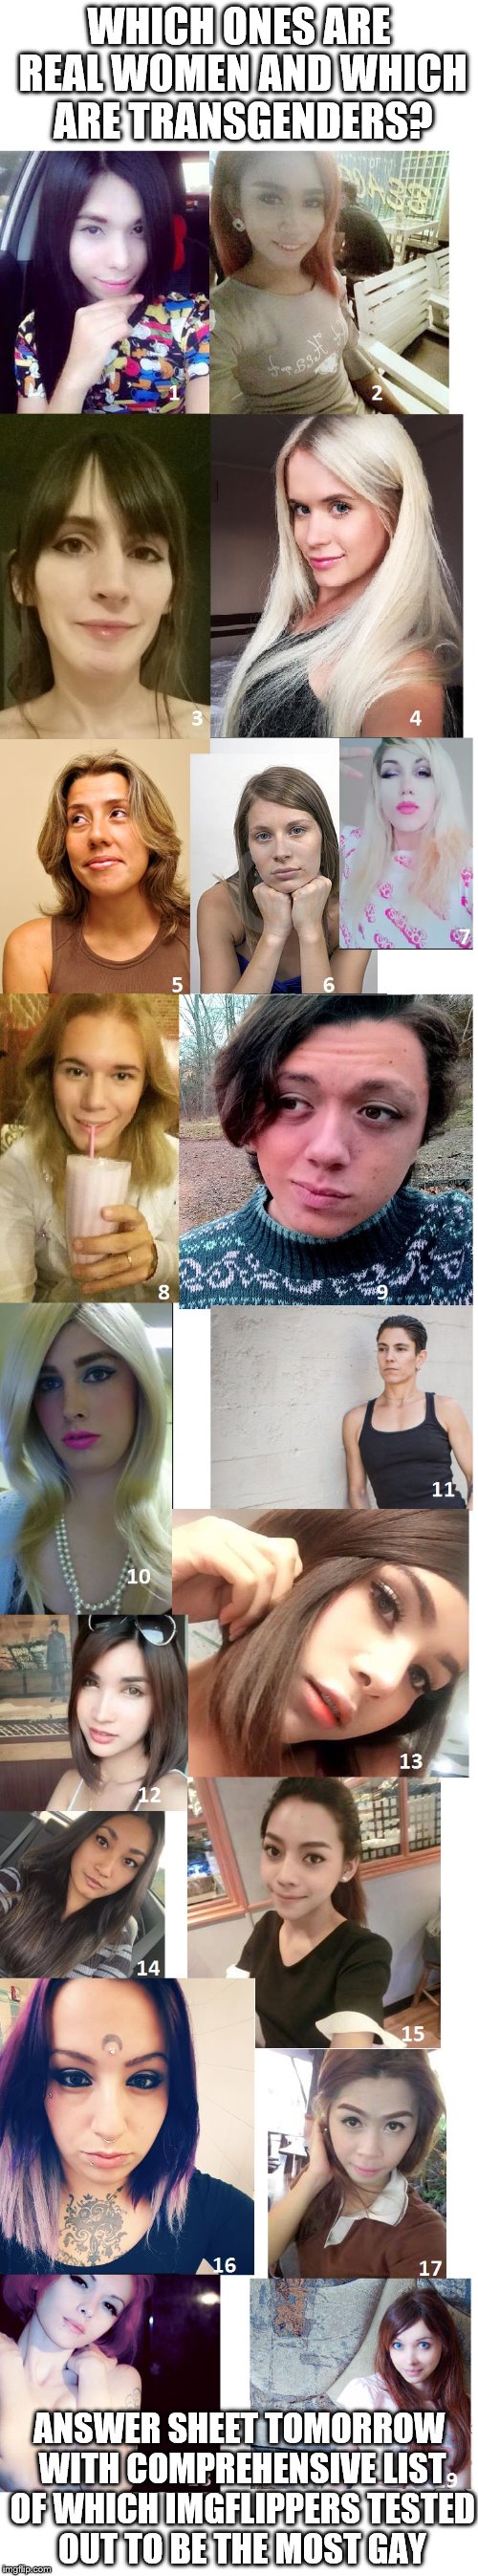 WHICH ONES ARE REAL WOMEN AND WHICH ARE TRANSGENDERS? ANSWER SHEET TOMORROW WITH COMPREHENSIVE LIST OF WHICH IMGFLIPPERS TESTED OUT TO BE THE MOST GAY | image tagged in which ones are real women | made w/ Imgflip meme maker